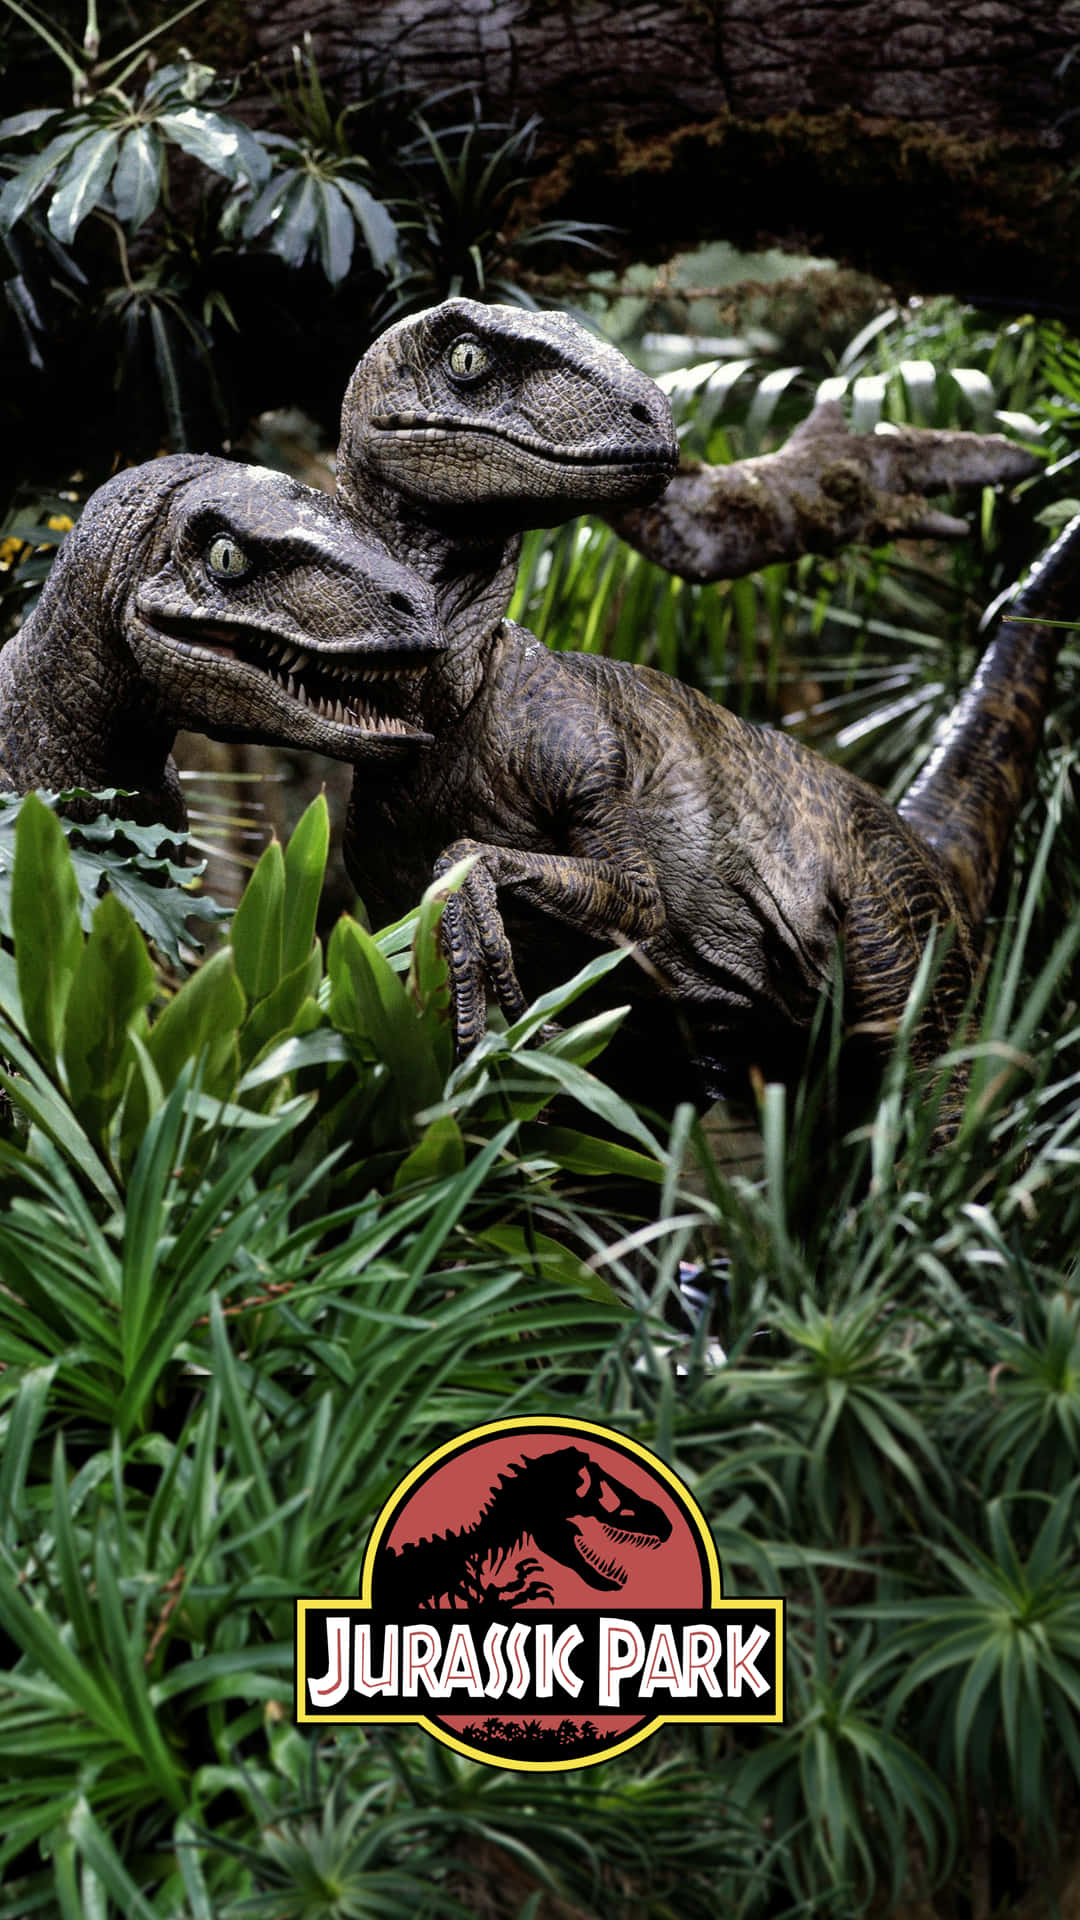 Walking in the footsteps of dinosaurs at Jurassic Park